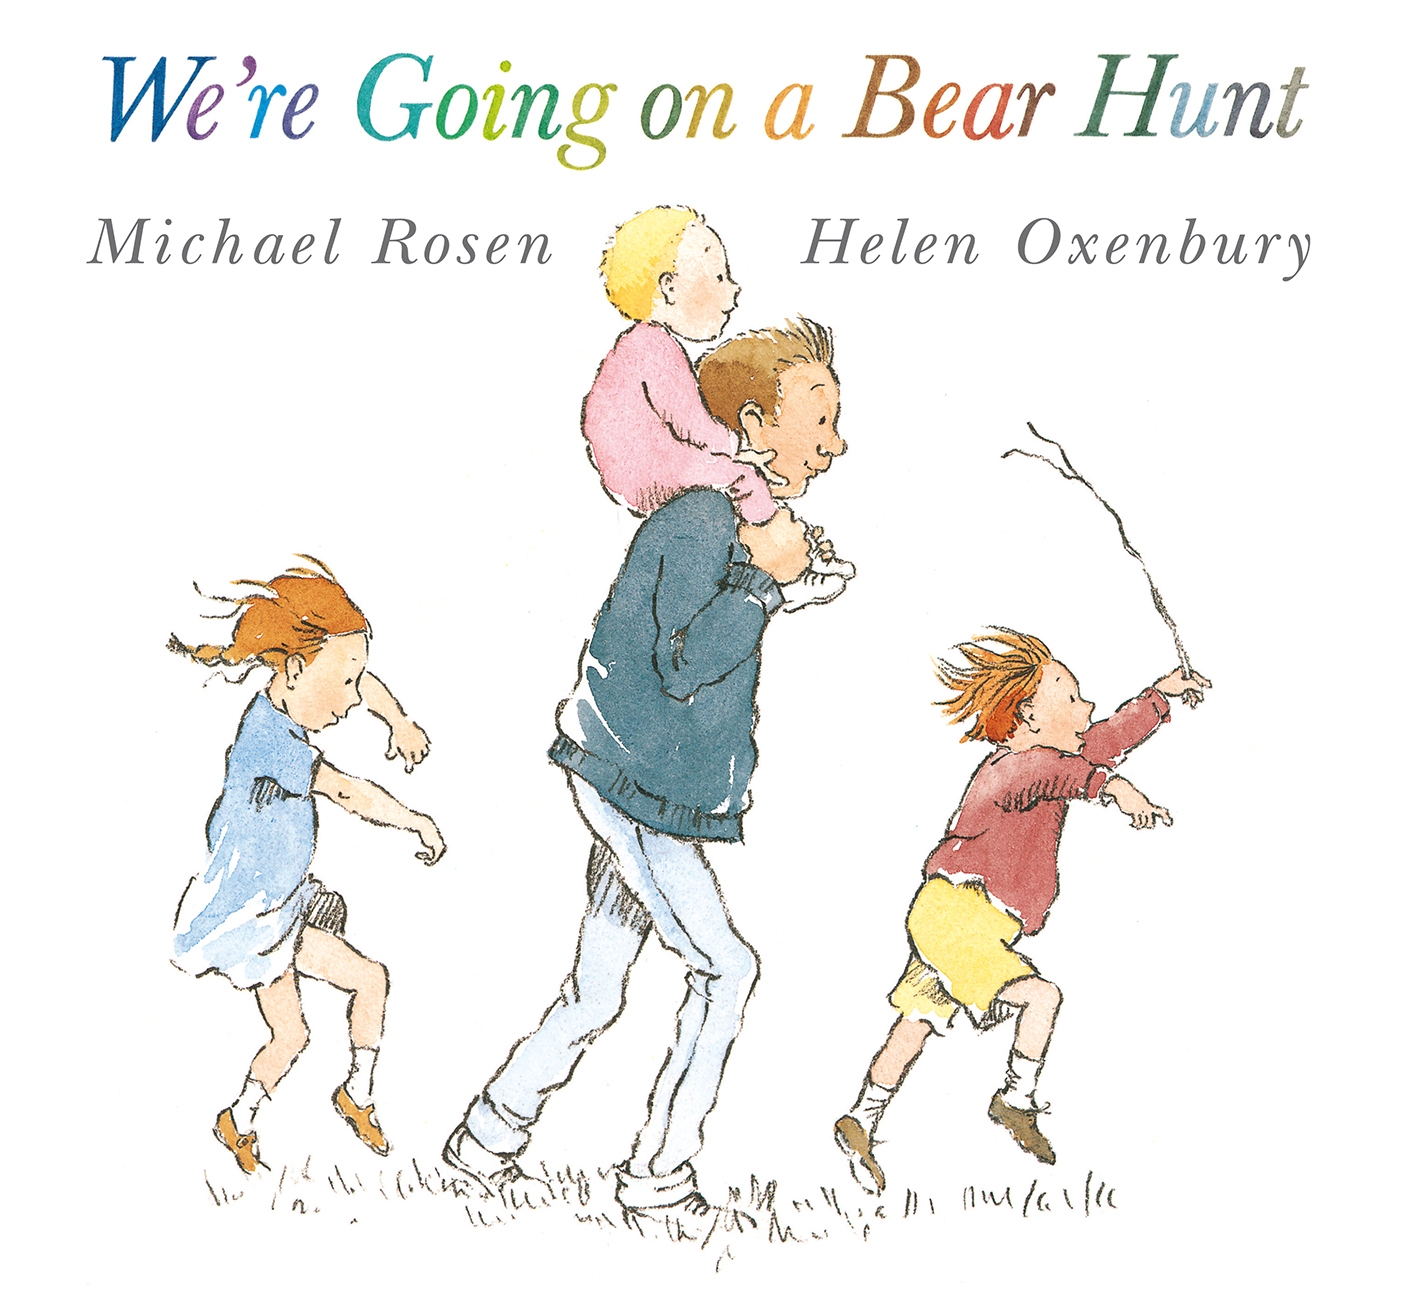 Creativity Education for Children: WE'RE GOING ON A BEAR HUNT